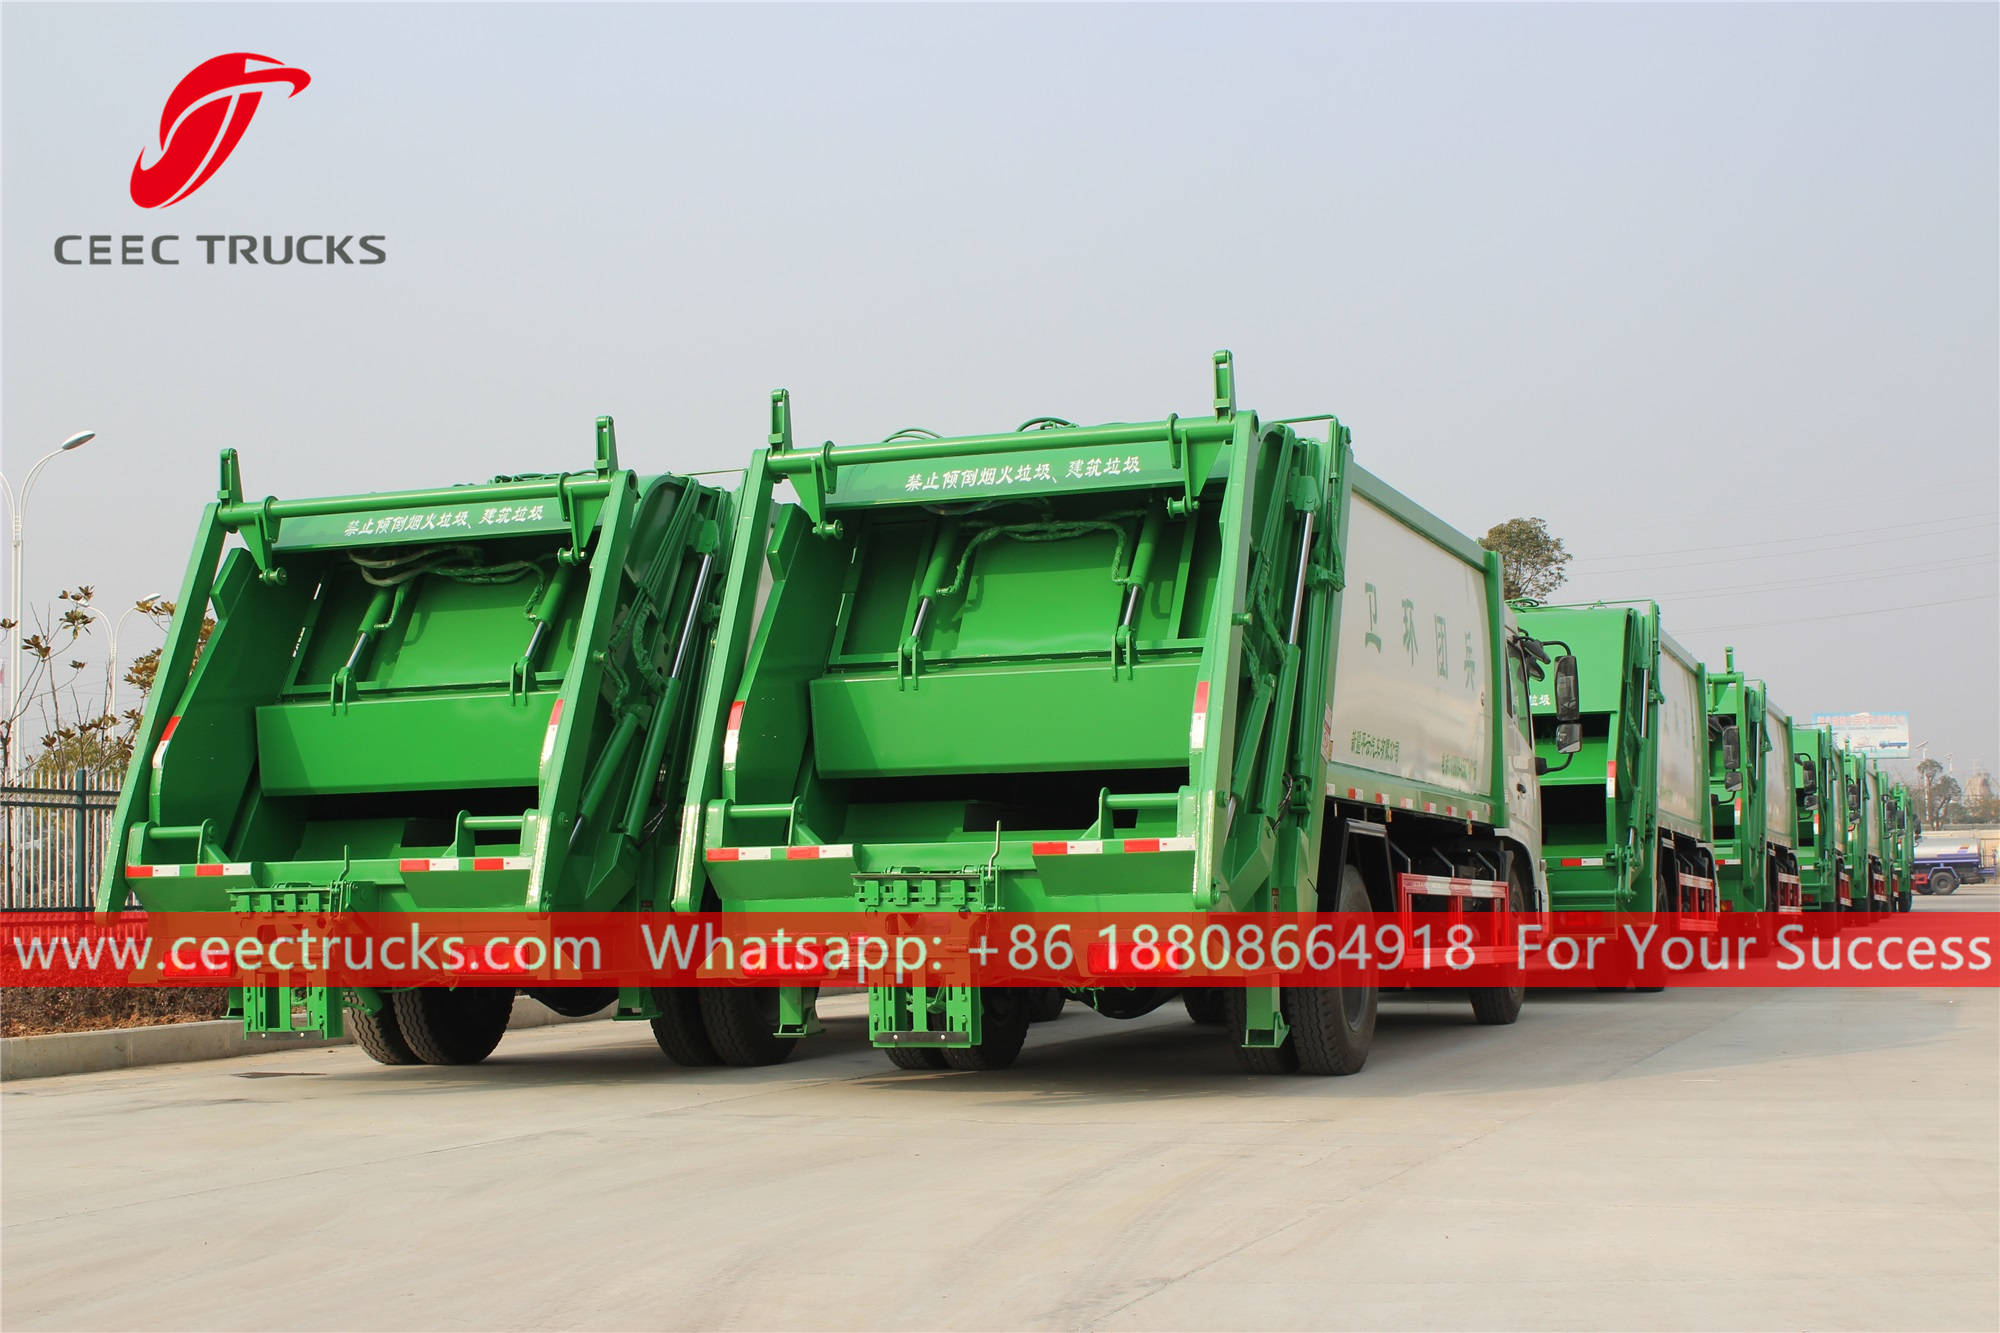 20 units rear loader waste truck are finished production